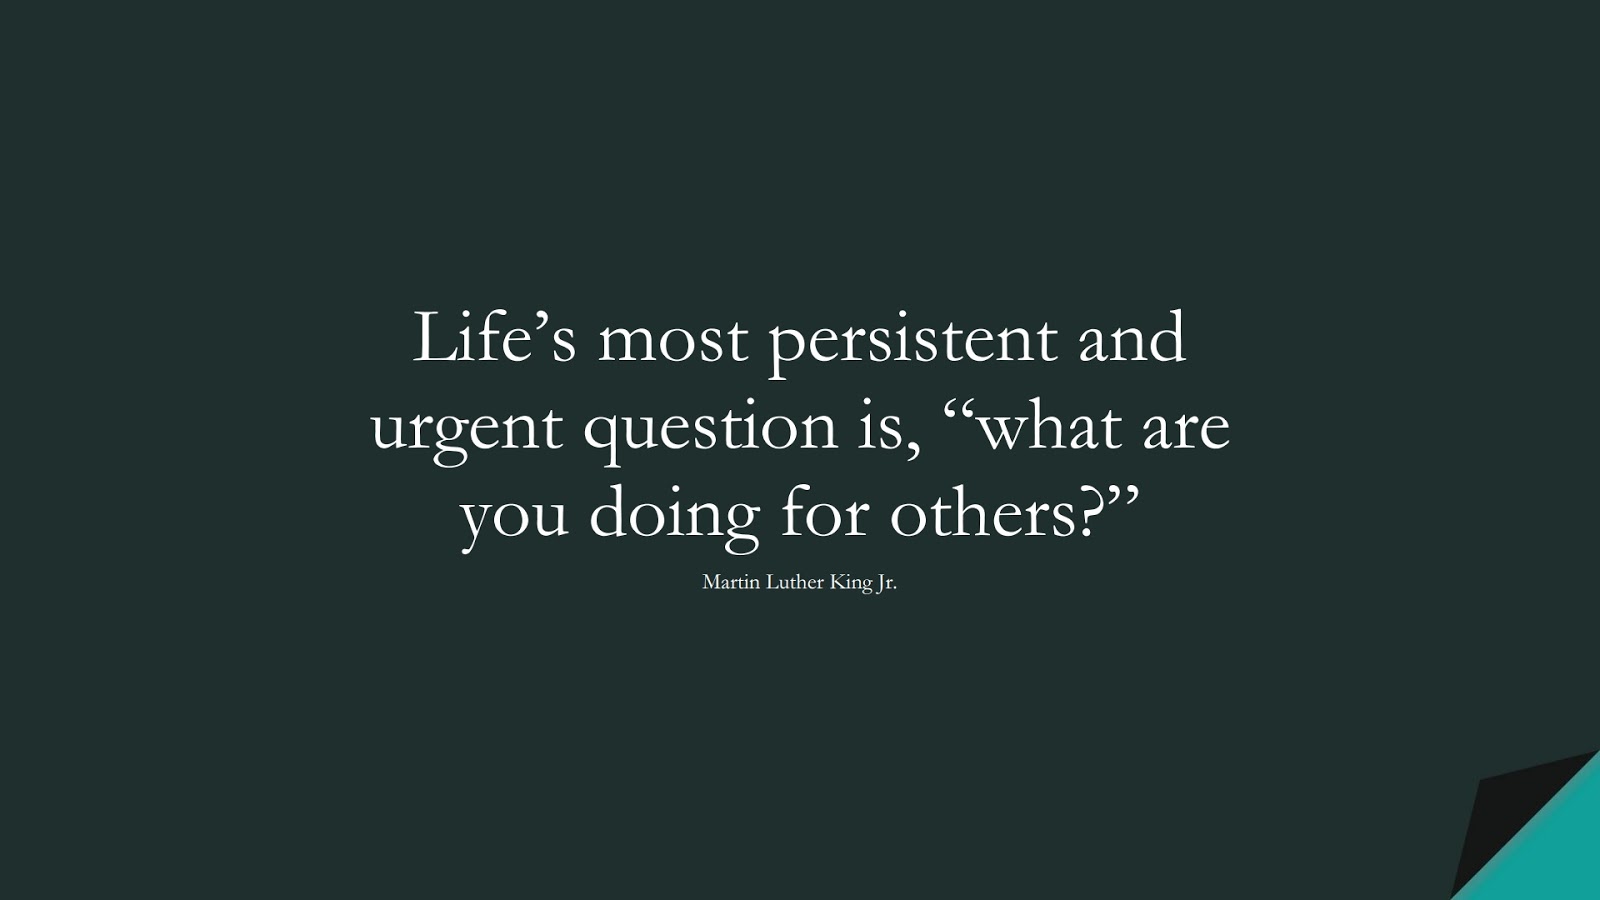 Life’s most persistent and urgent question is, “what are you doing for others?” (Martin Luther King Jr.);  #BestQuotes